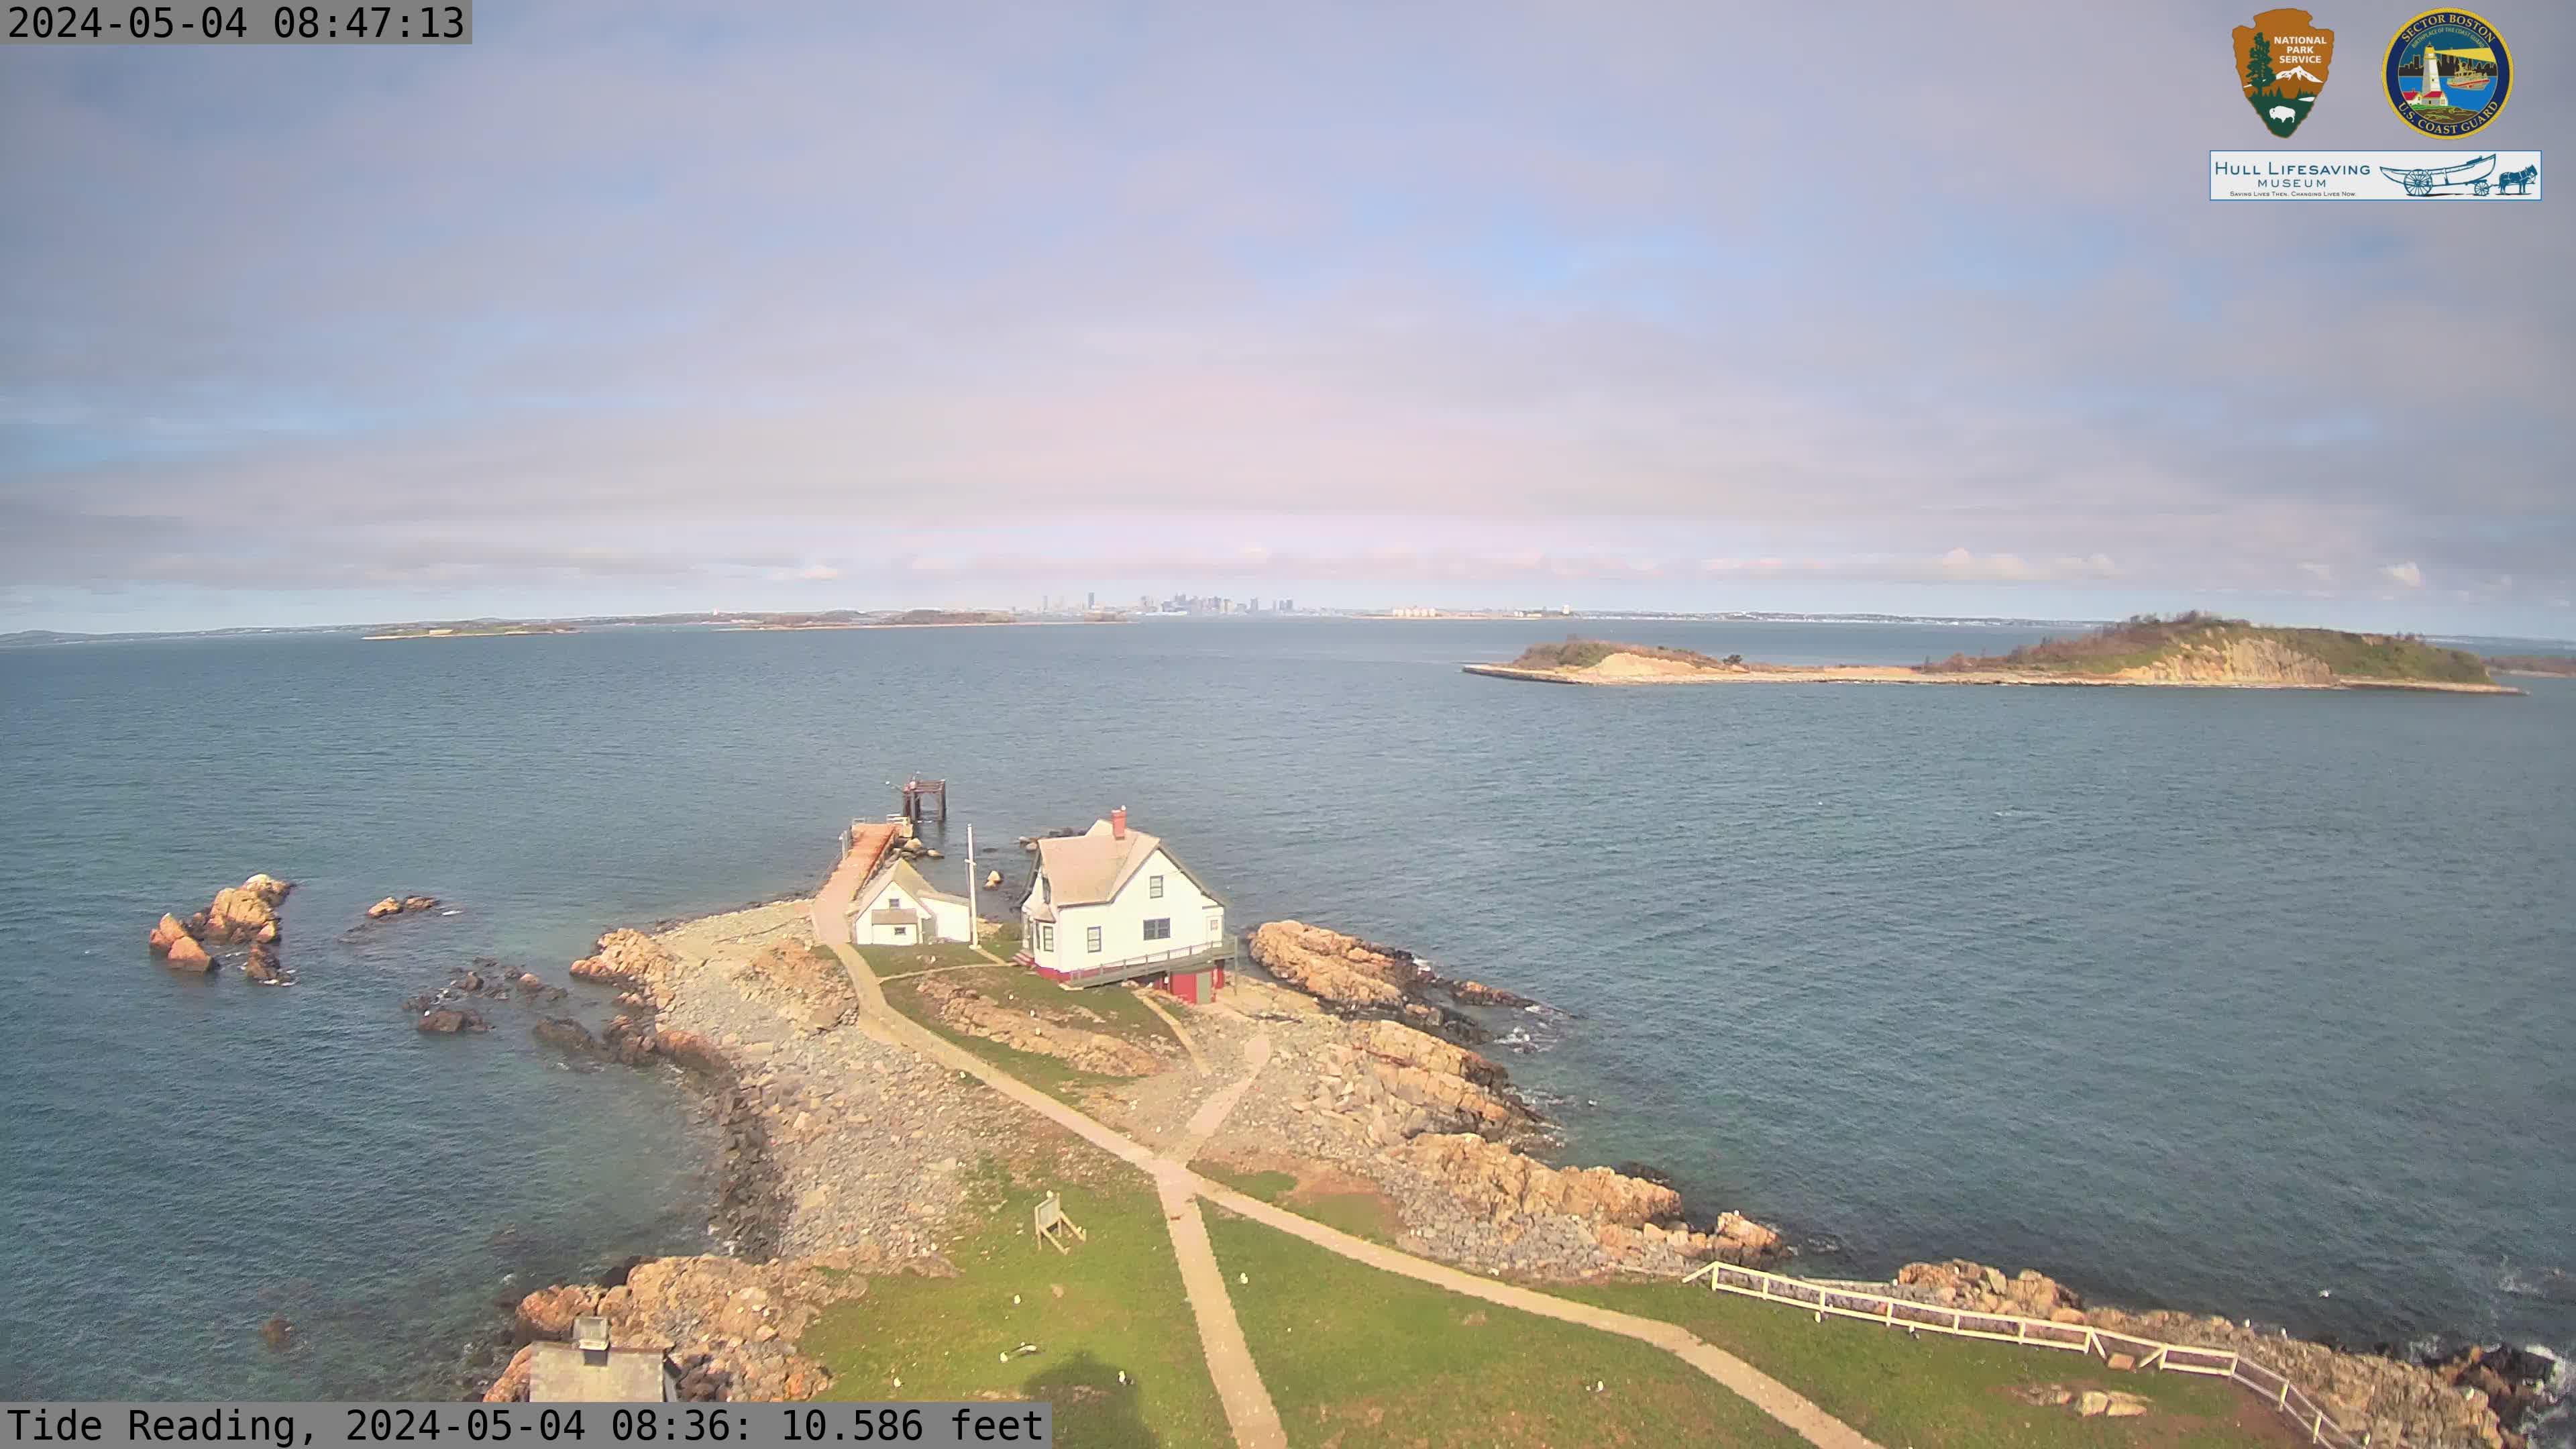 Little Brewster - Boston Light Looking West preview image